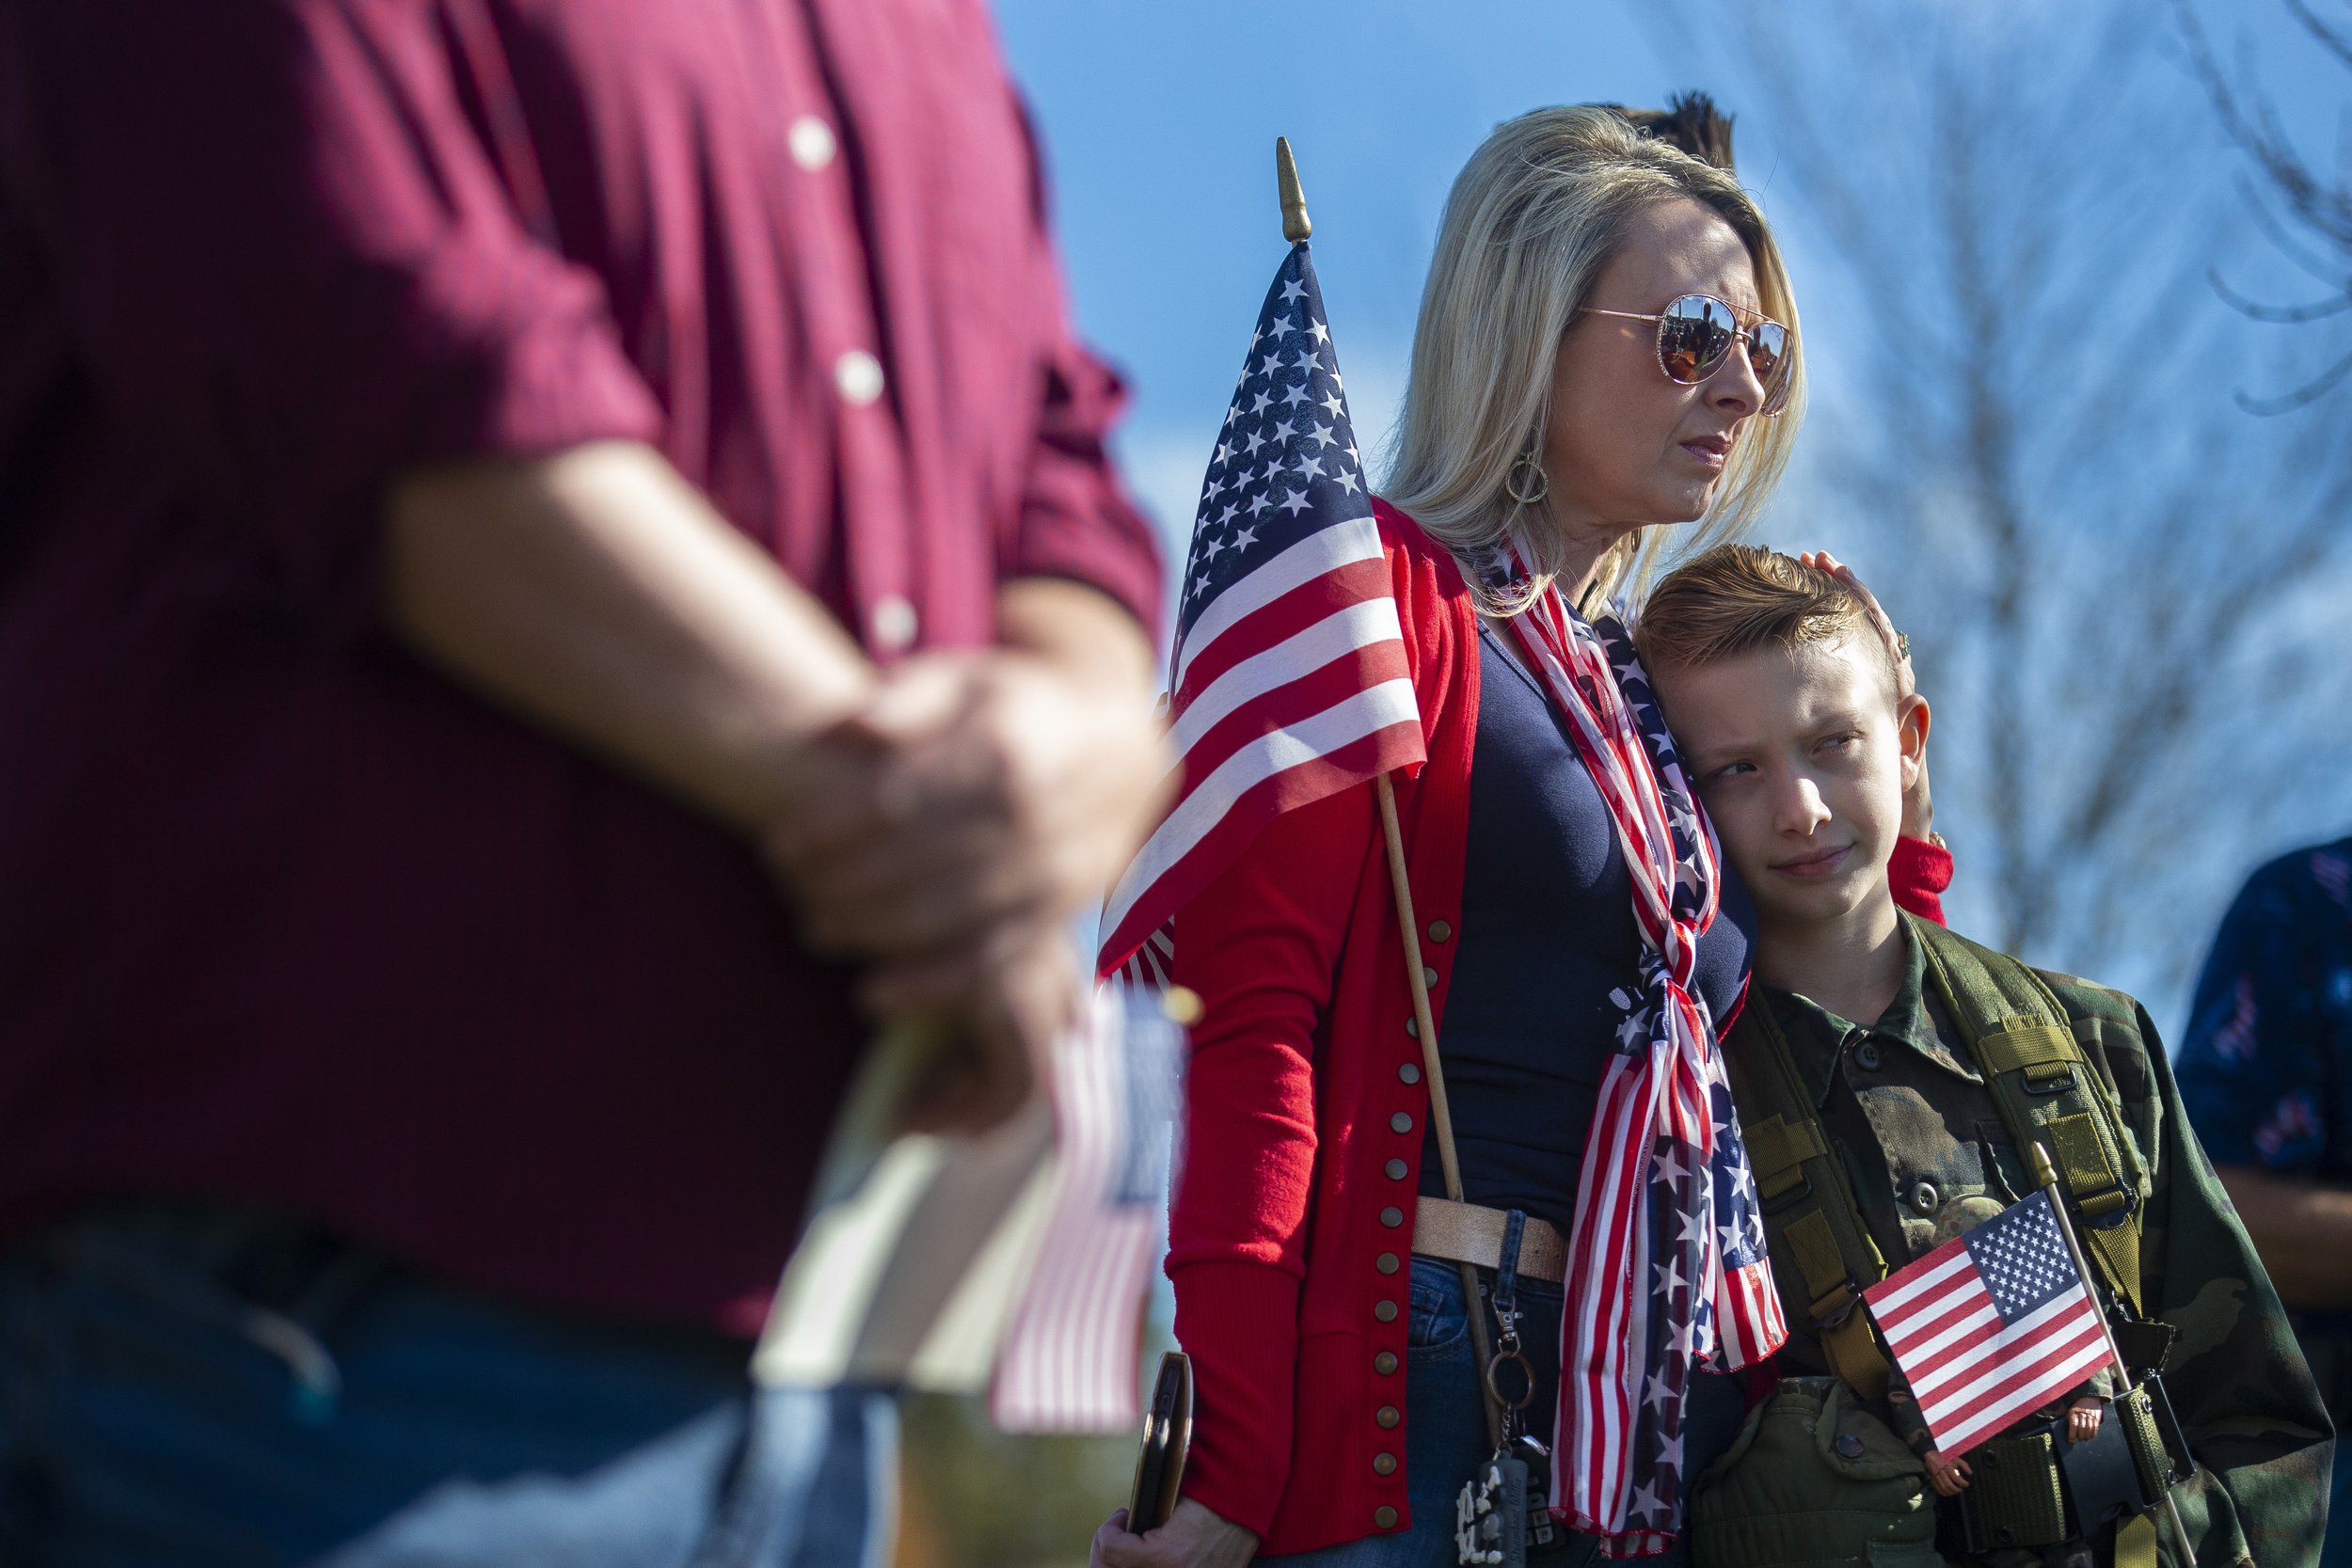  Elizabeth Barker comforts her son Linus Barker as the story of J.T. Doss is retold  during the annual Veterans Day ceremony at Triad Park in Kernersville, N.C., on Thursday,November 11, 2021.    "His heart has been hurting a lot today, he's been thi